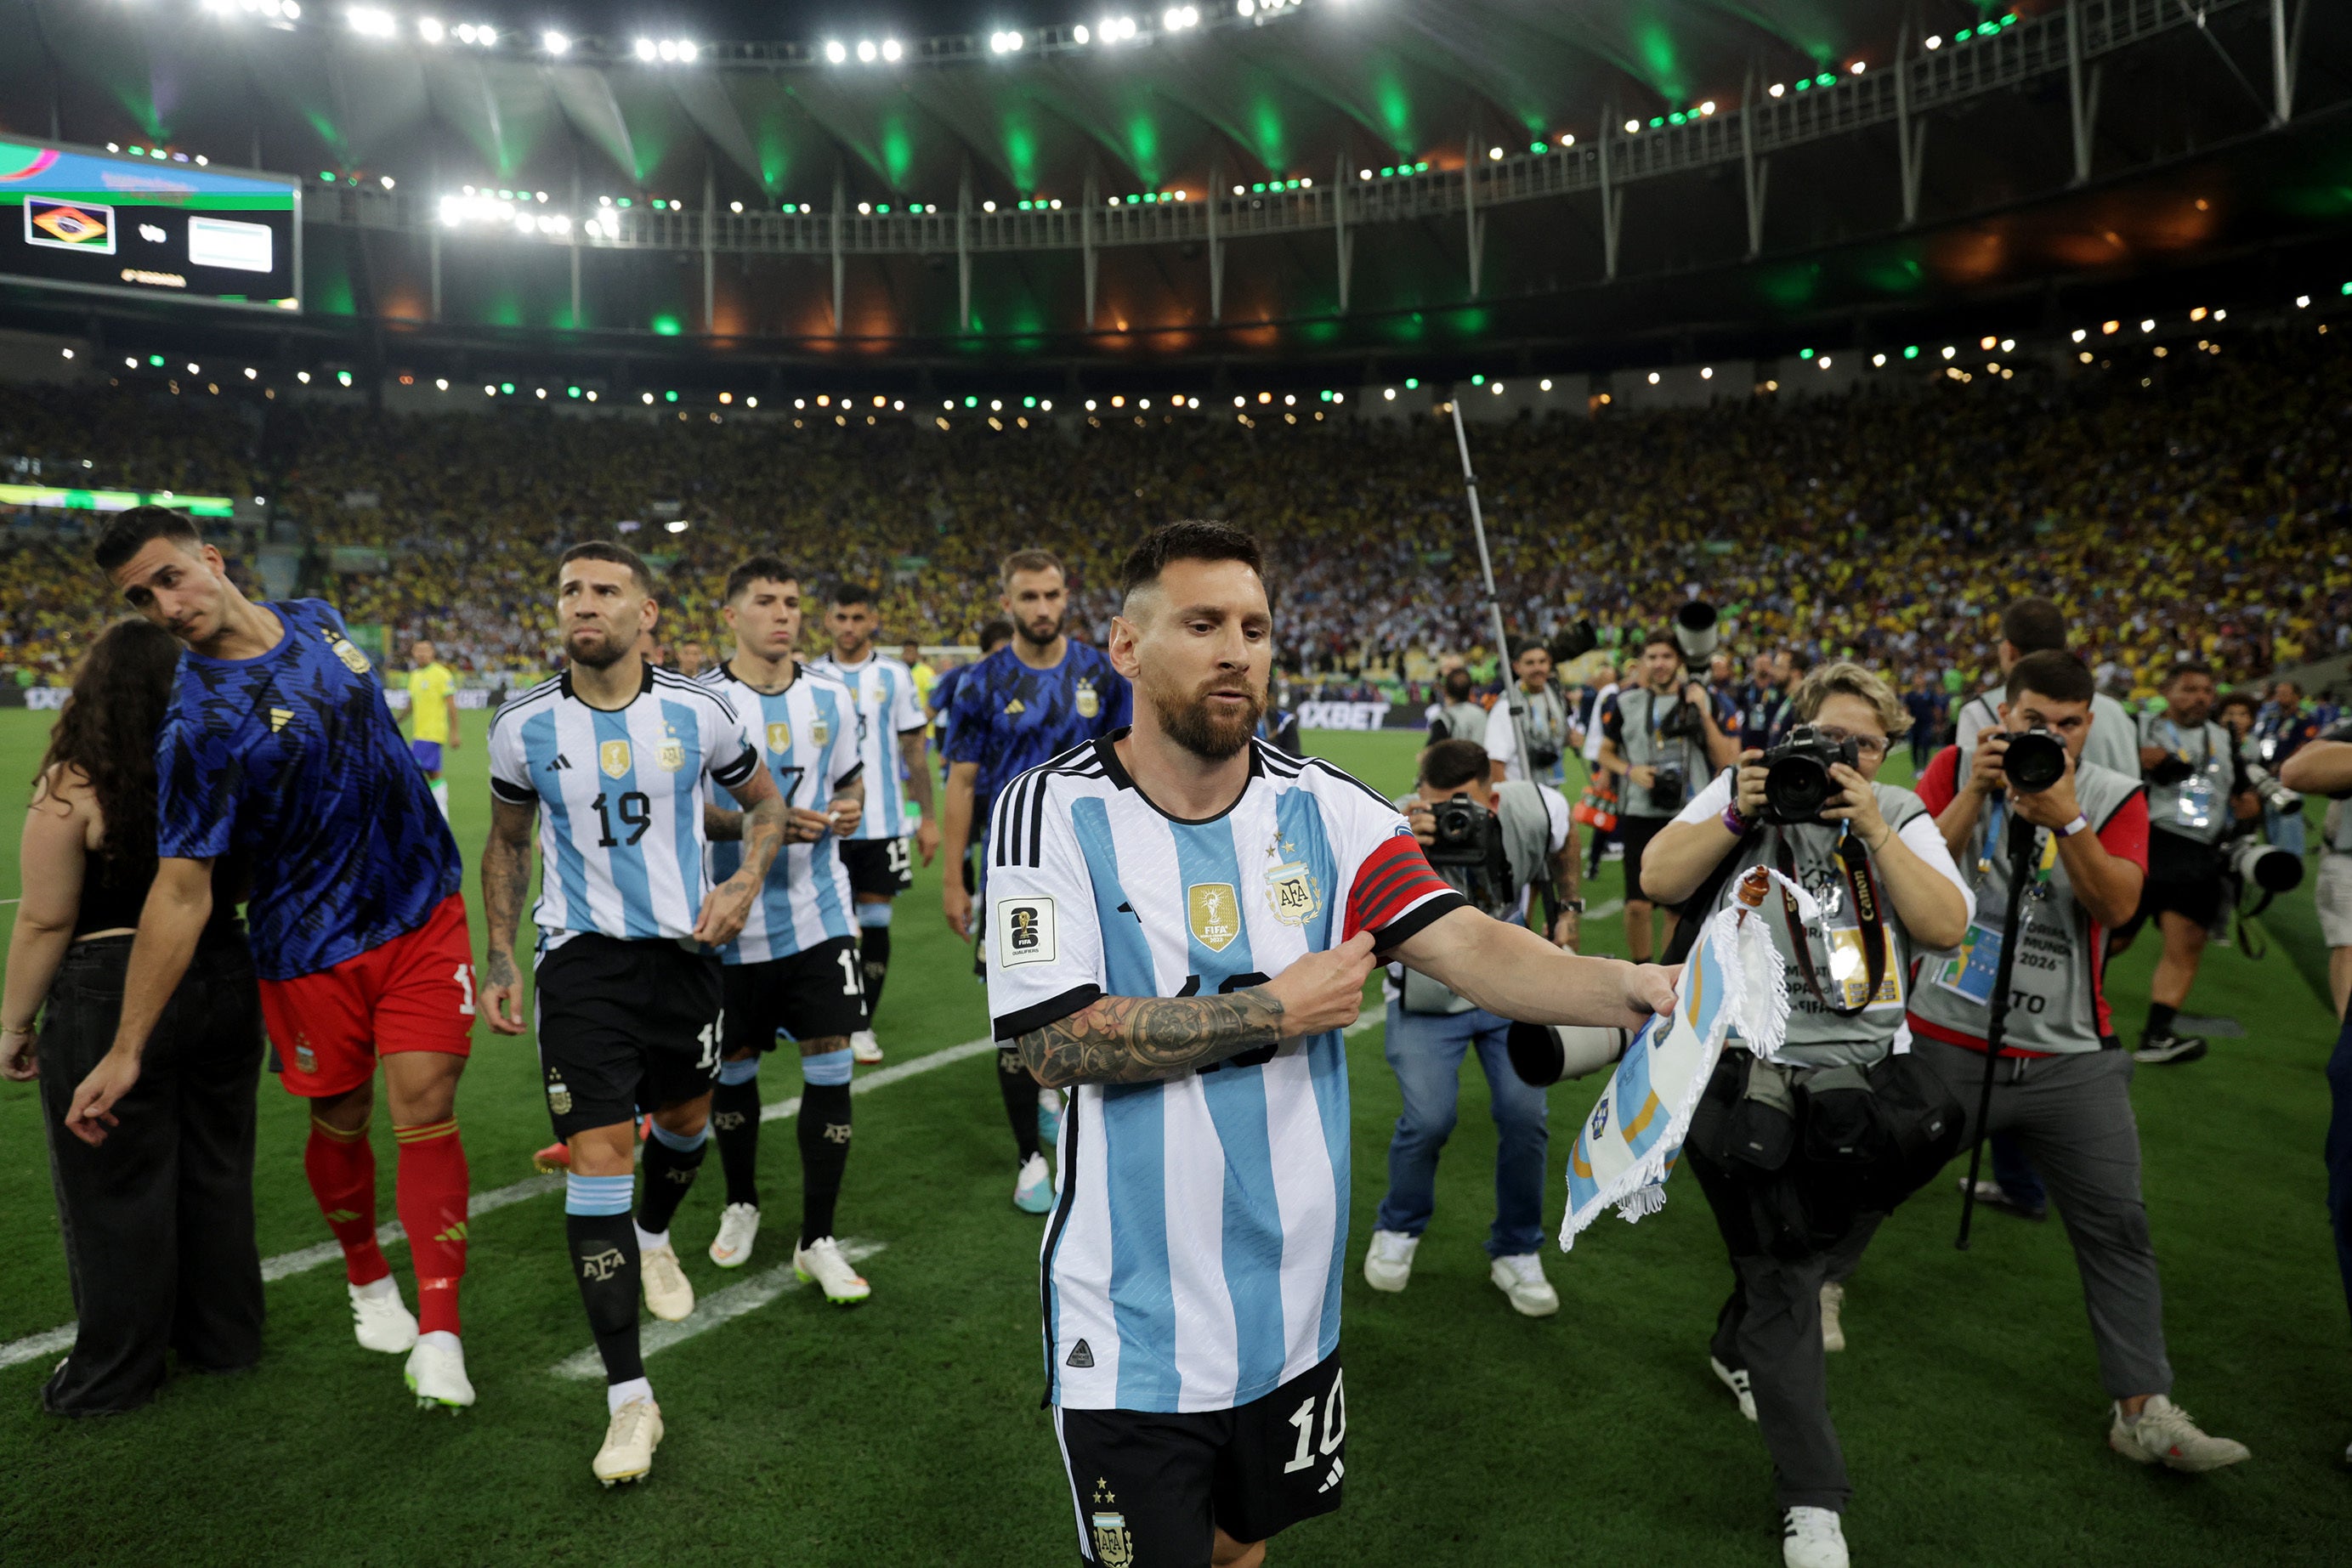 Lionel Messi said the match become of ‘secondary importance’ after violence broke out